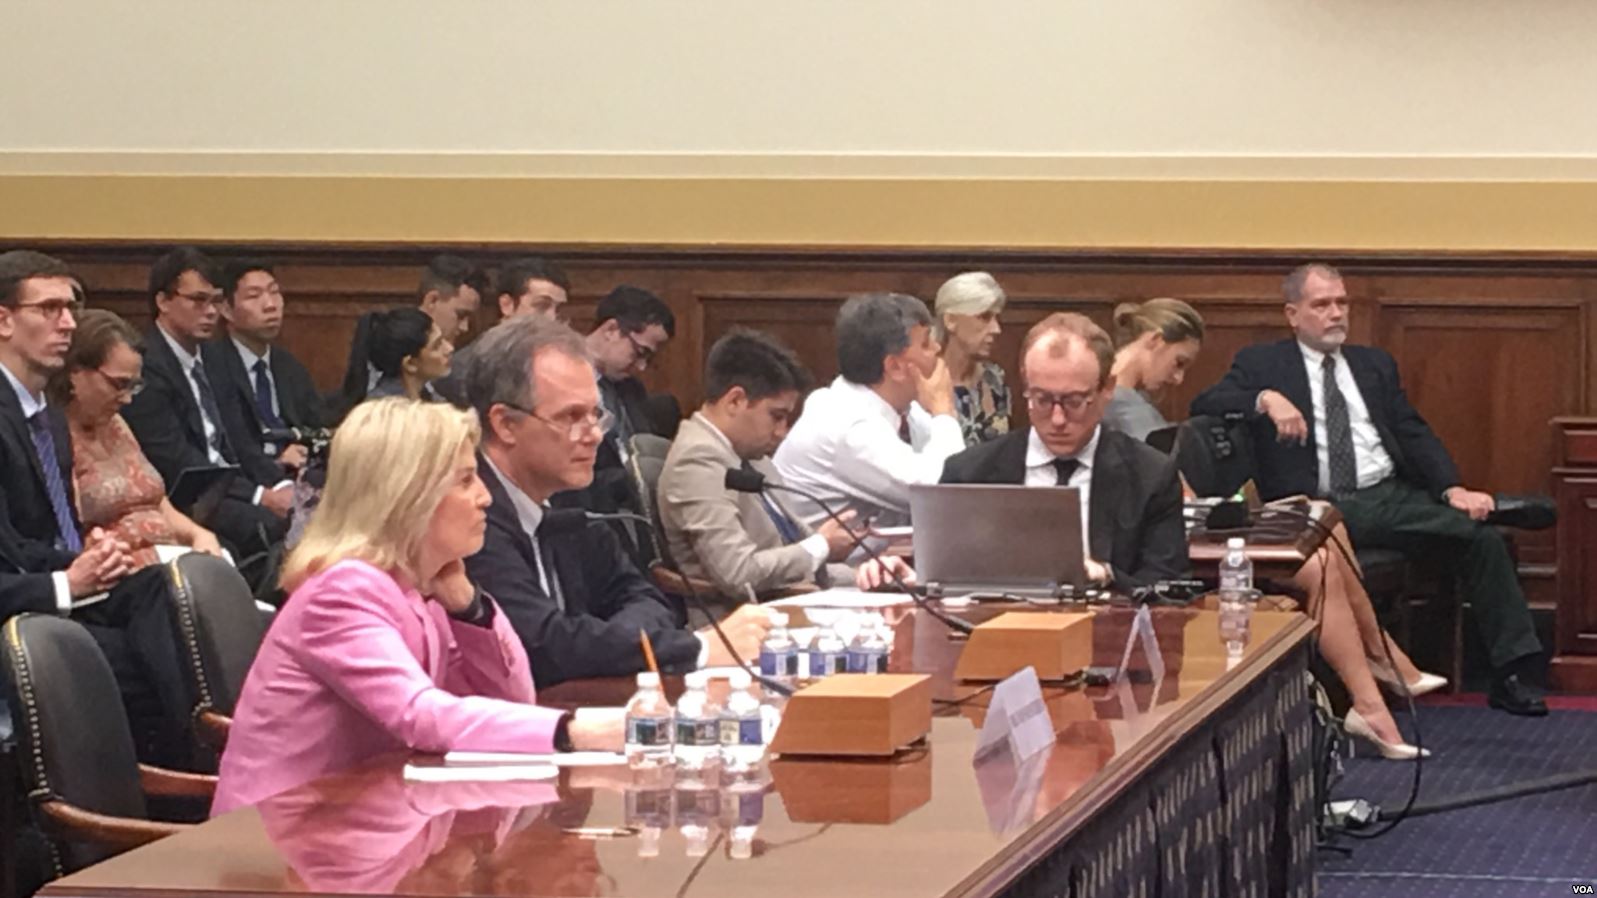 VOA Contributor Greta Van Susteren Spotlights the Rohingya Refugee Crisis in Testimony before the House Foreign Affairs Committee